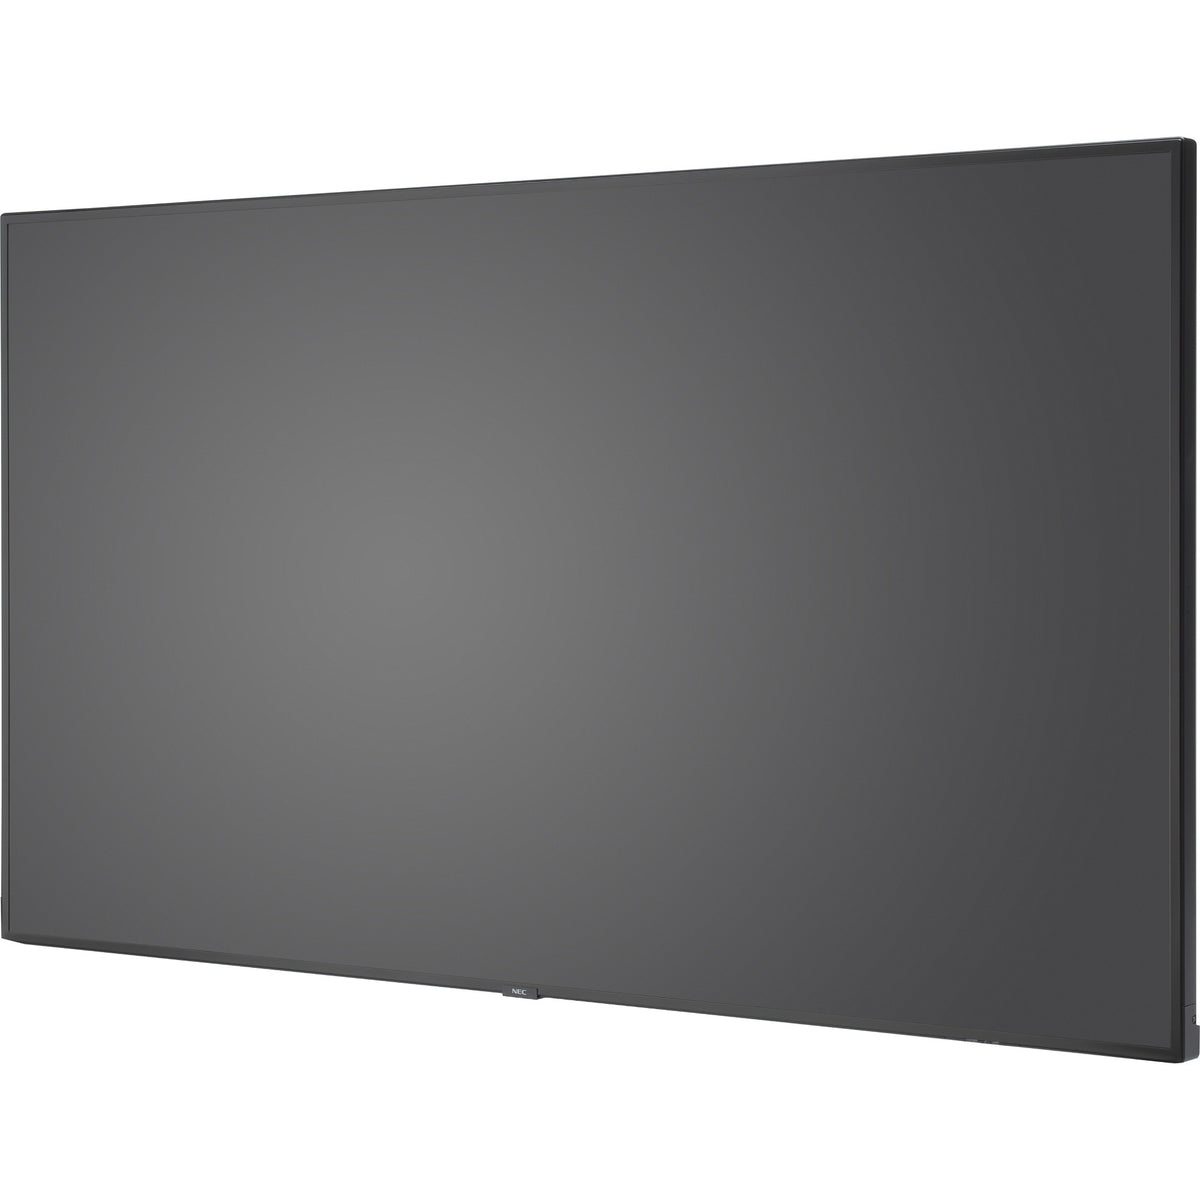 NEC Display 75" Ultra High Definition Commercial Display - C751Q